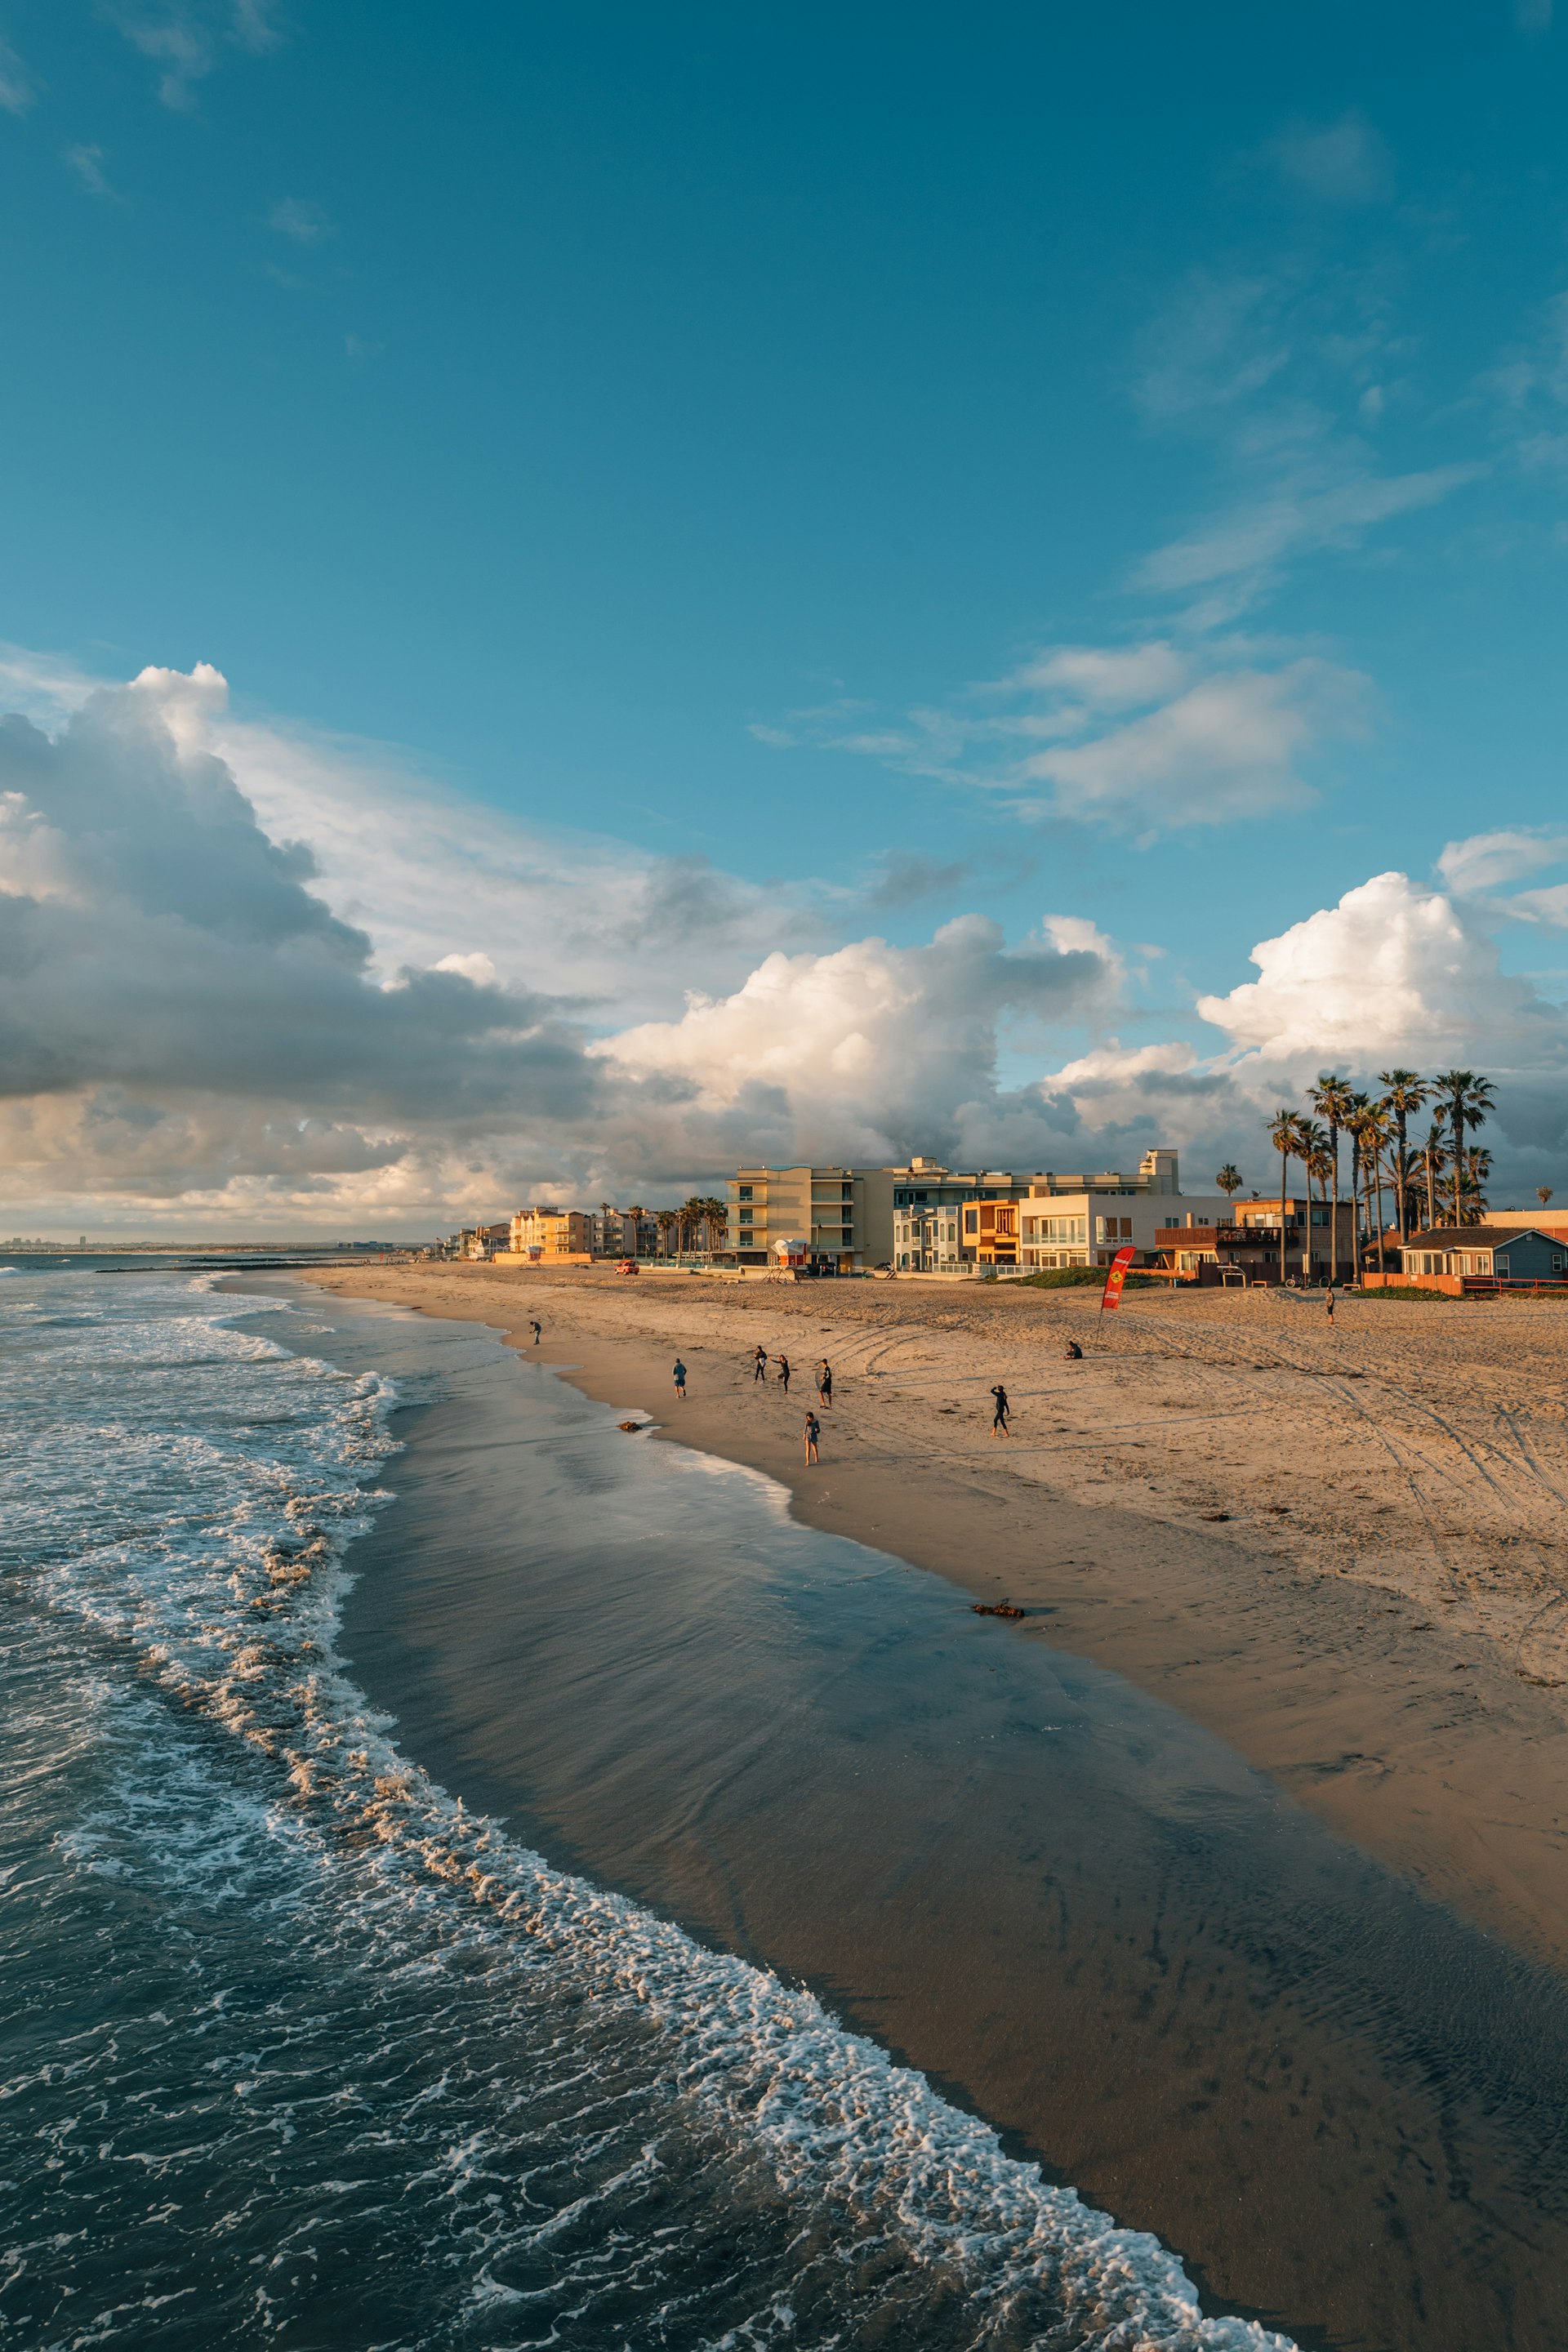 View of the beach from the pier in Imperial Beach, near San Diego, California